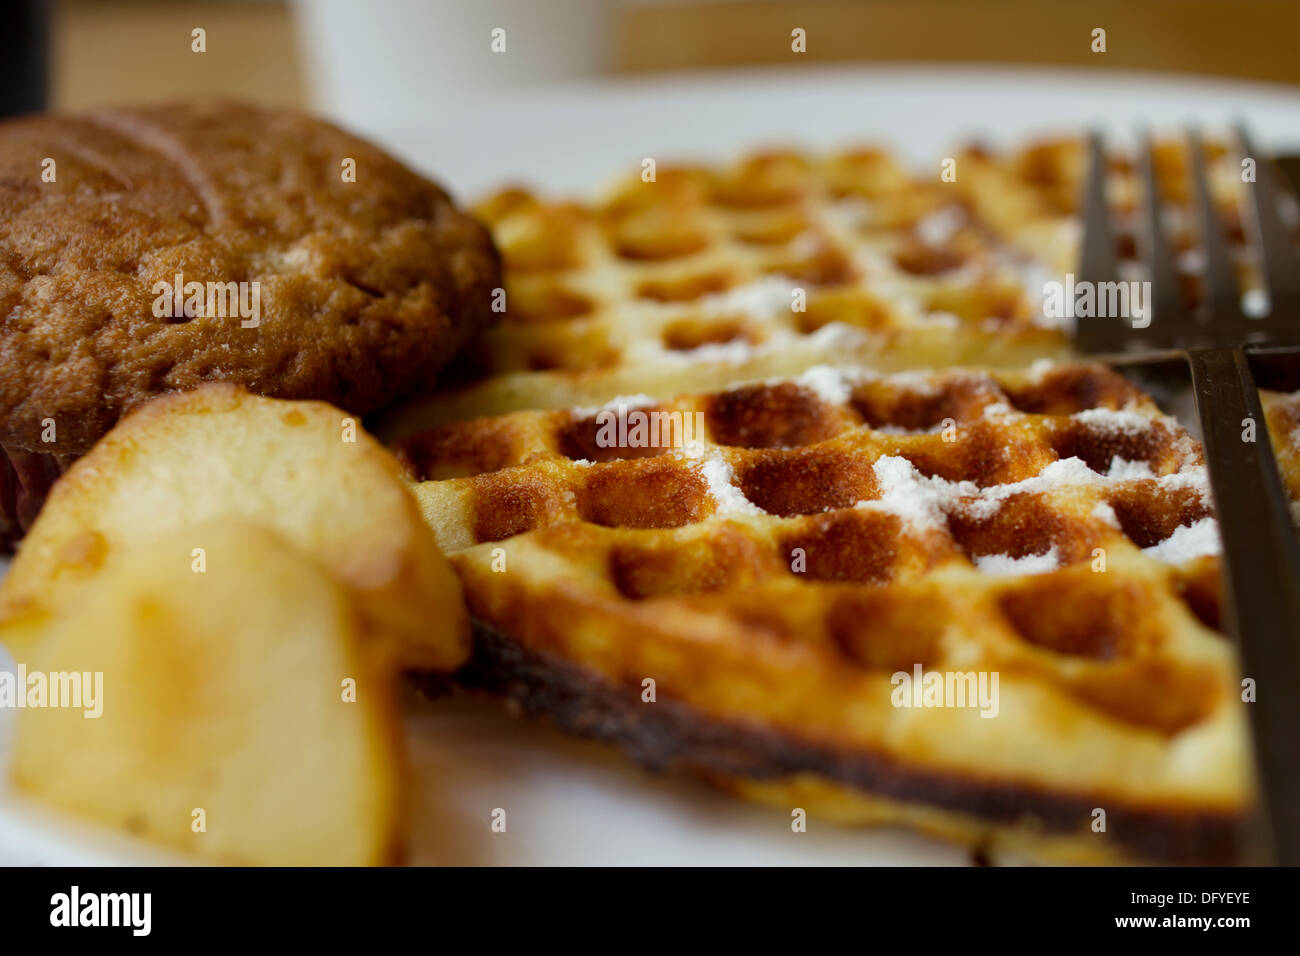 Waffles, Banana Chocolate Muffin And Grilled Potatoes served for breakfast. Powdered sugar is sprinkled on the waffle. Stock Photo